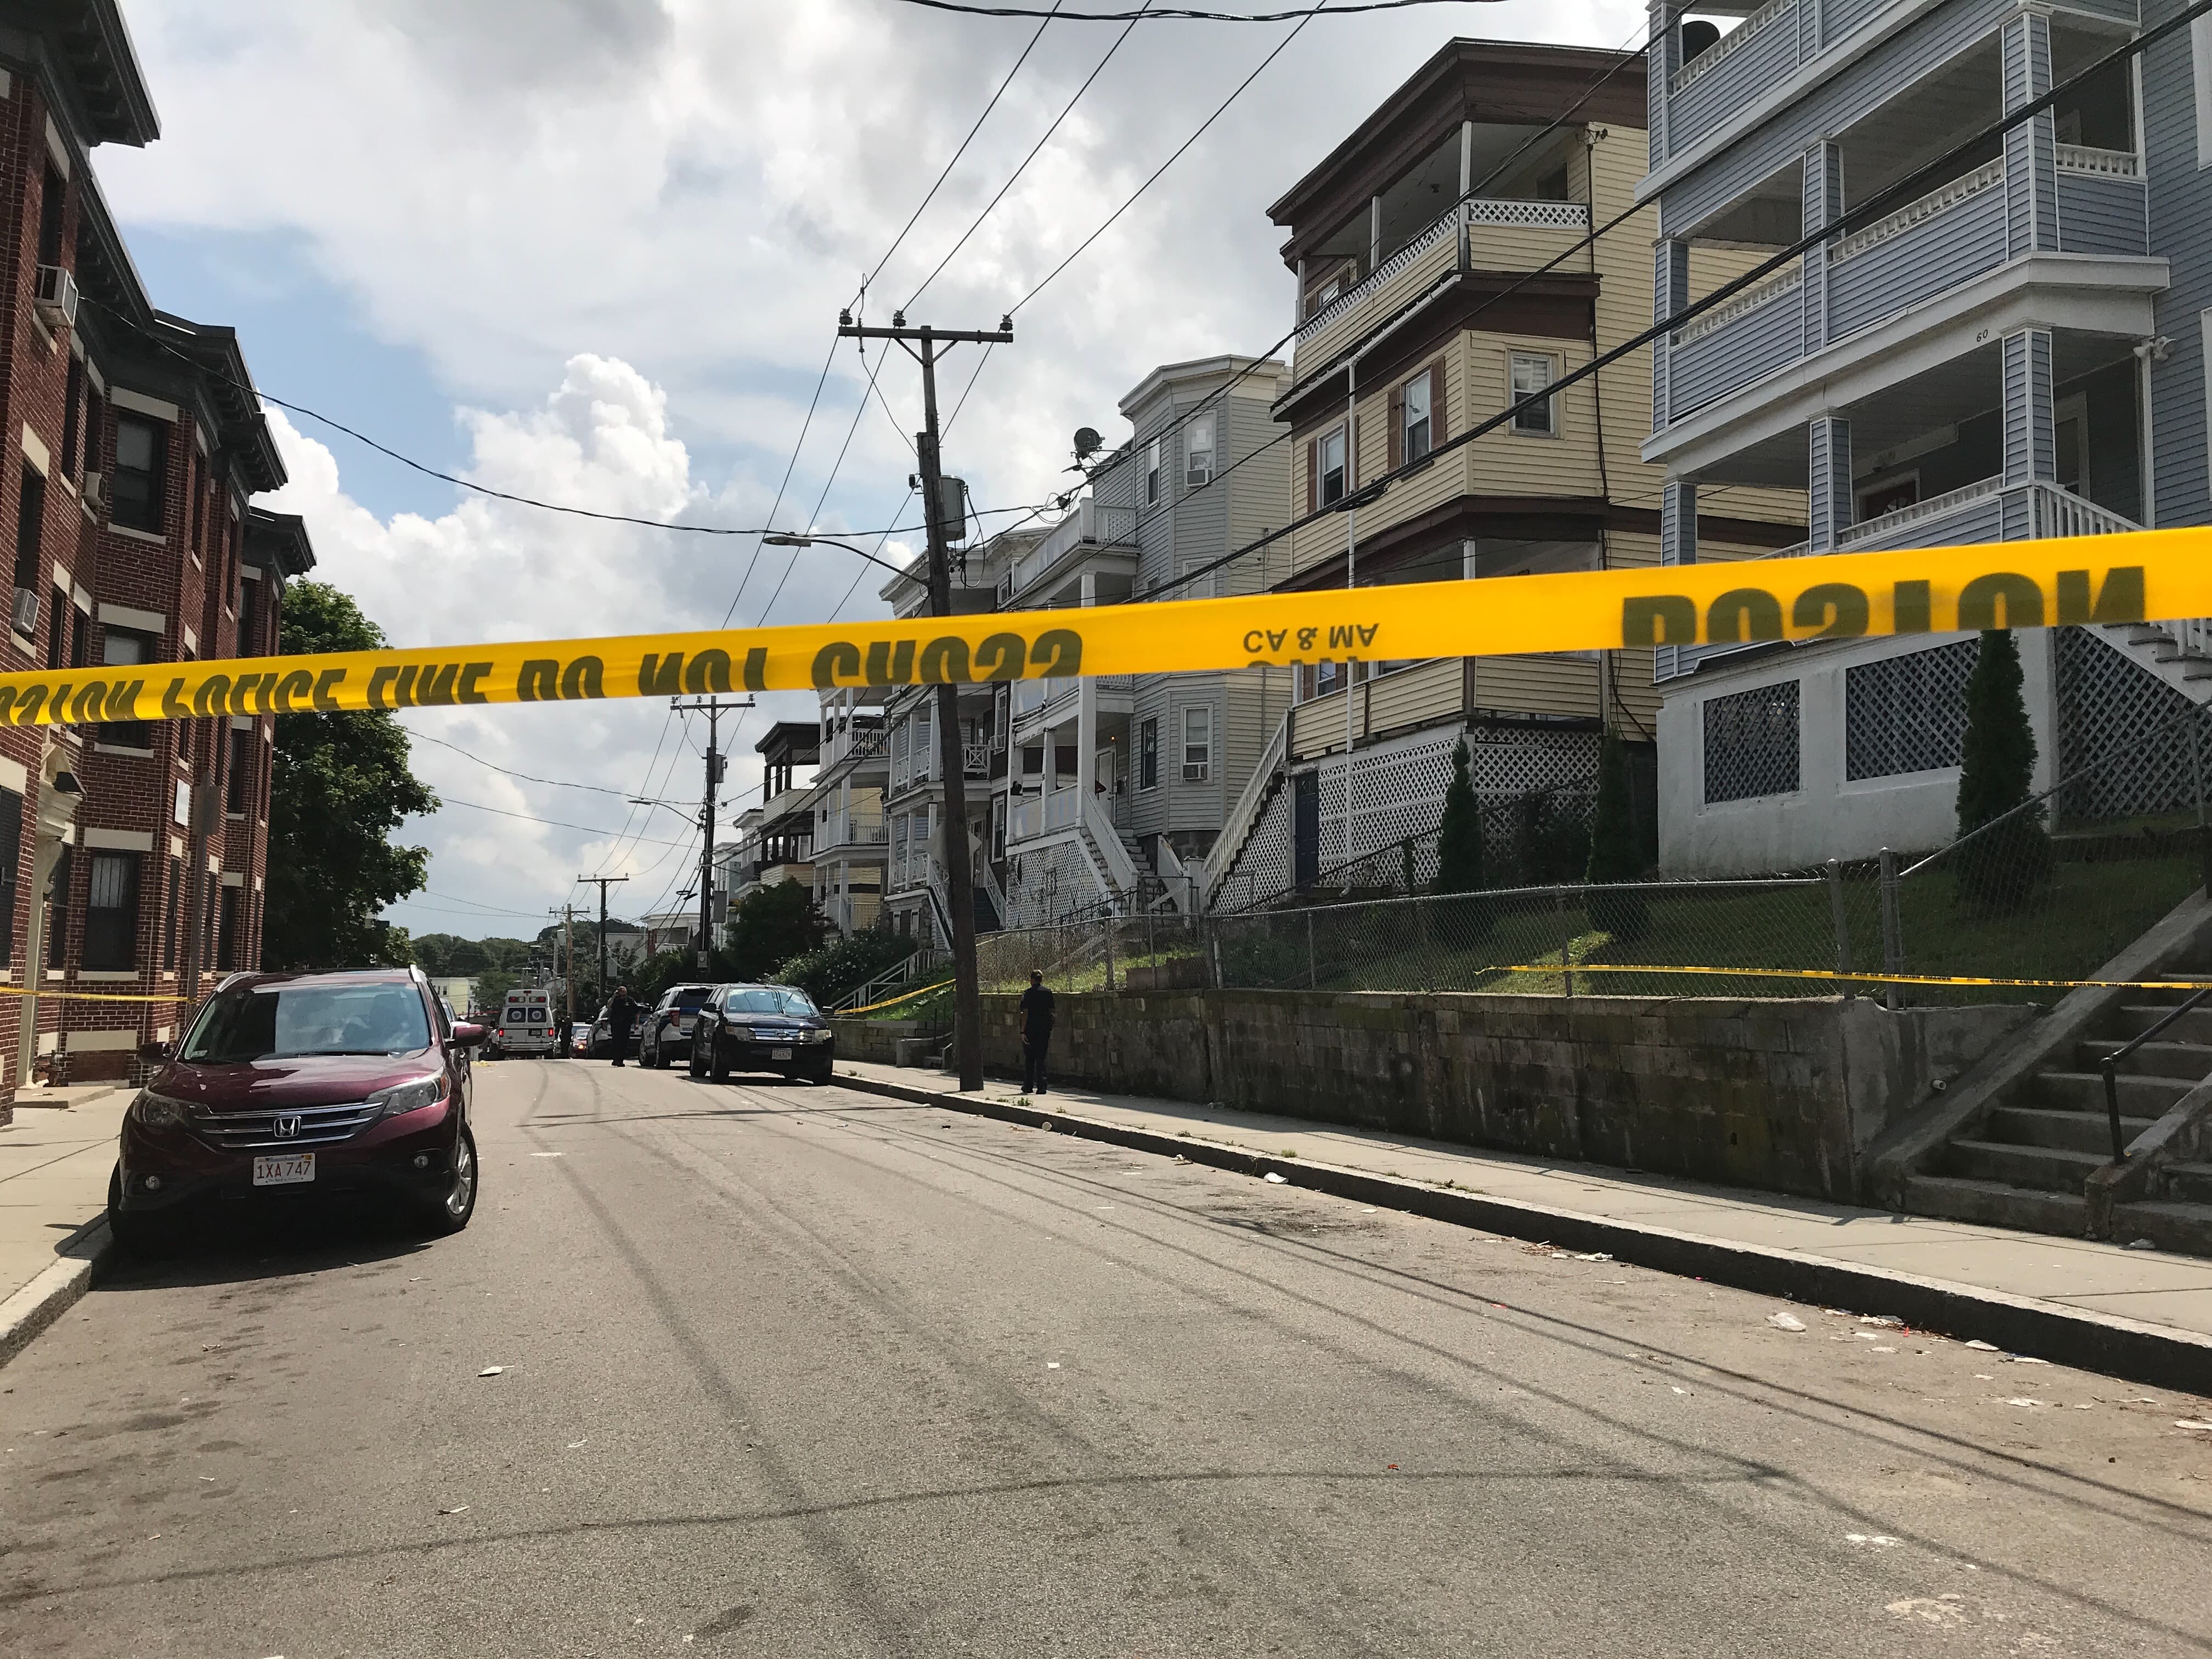 Police tape runs across Deering Road, where a fatal shooting left one young man dead and two others injured. (Quincy Walters/WBUR)